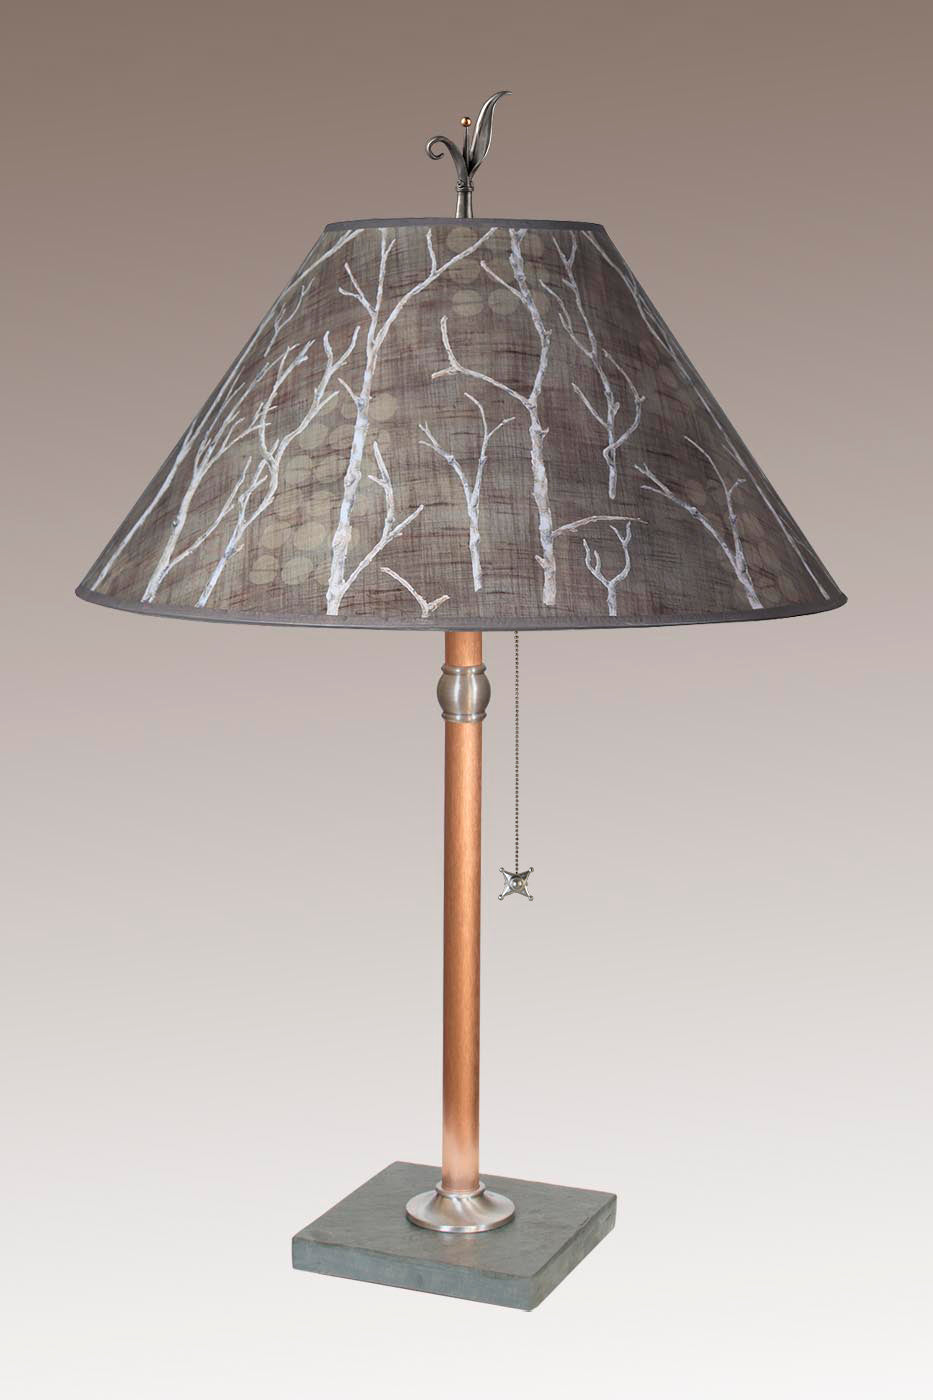 Copper Table Lamp with Large Conical Shade in Twigs